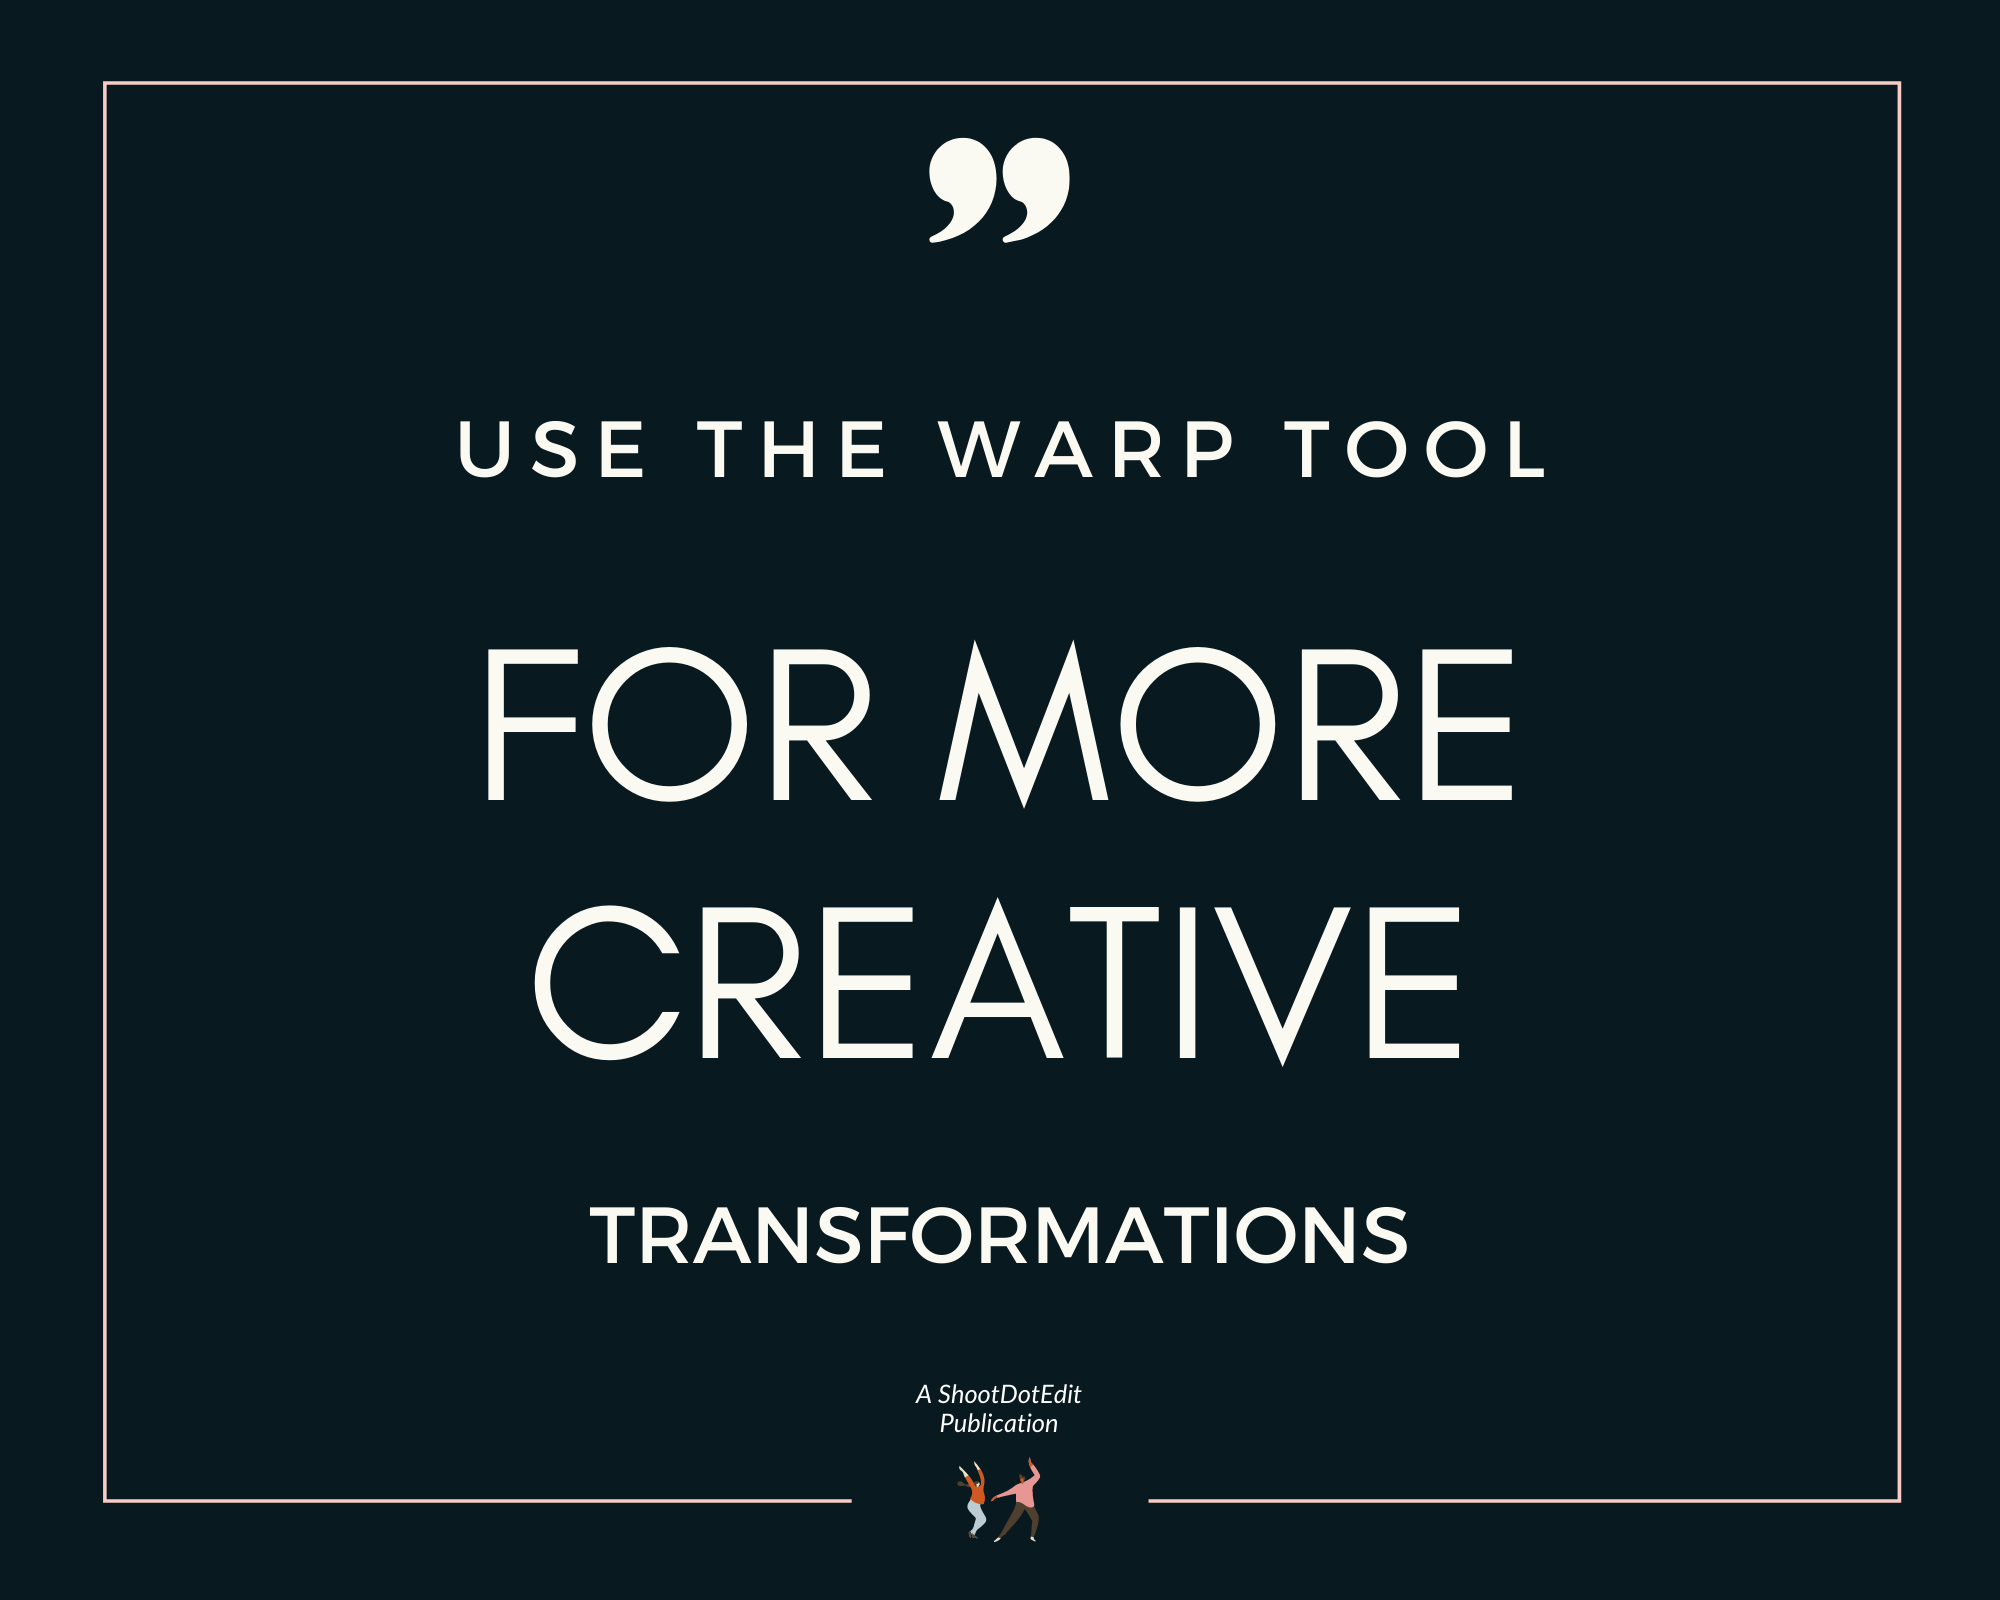 Infographic stating use the warp tool for more creative transformations